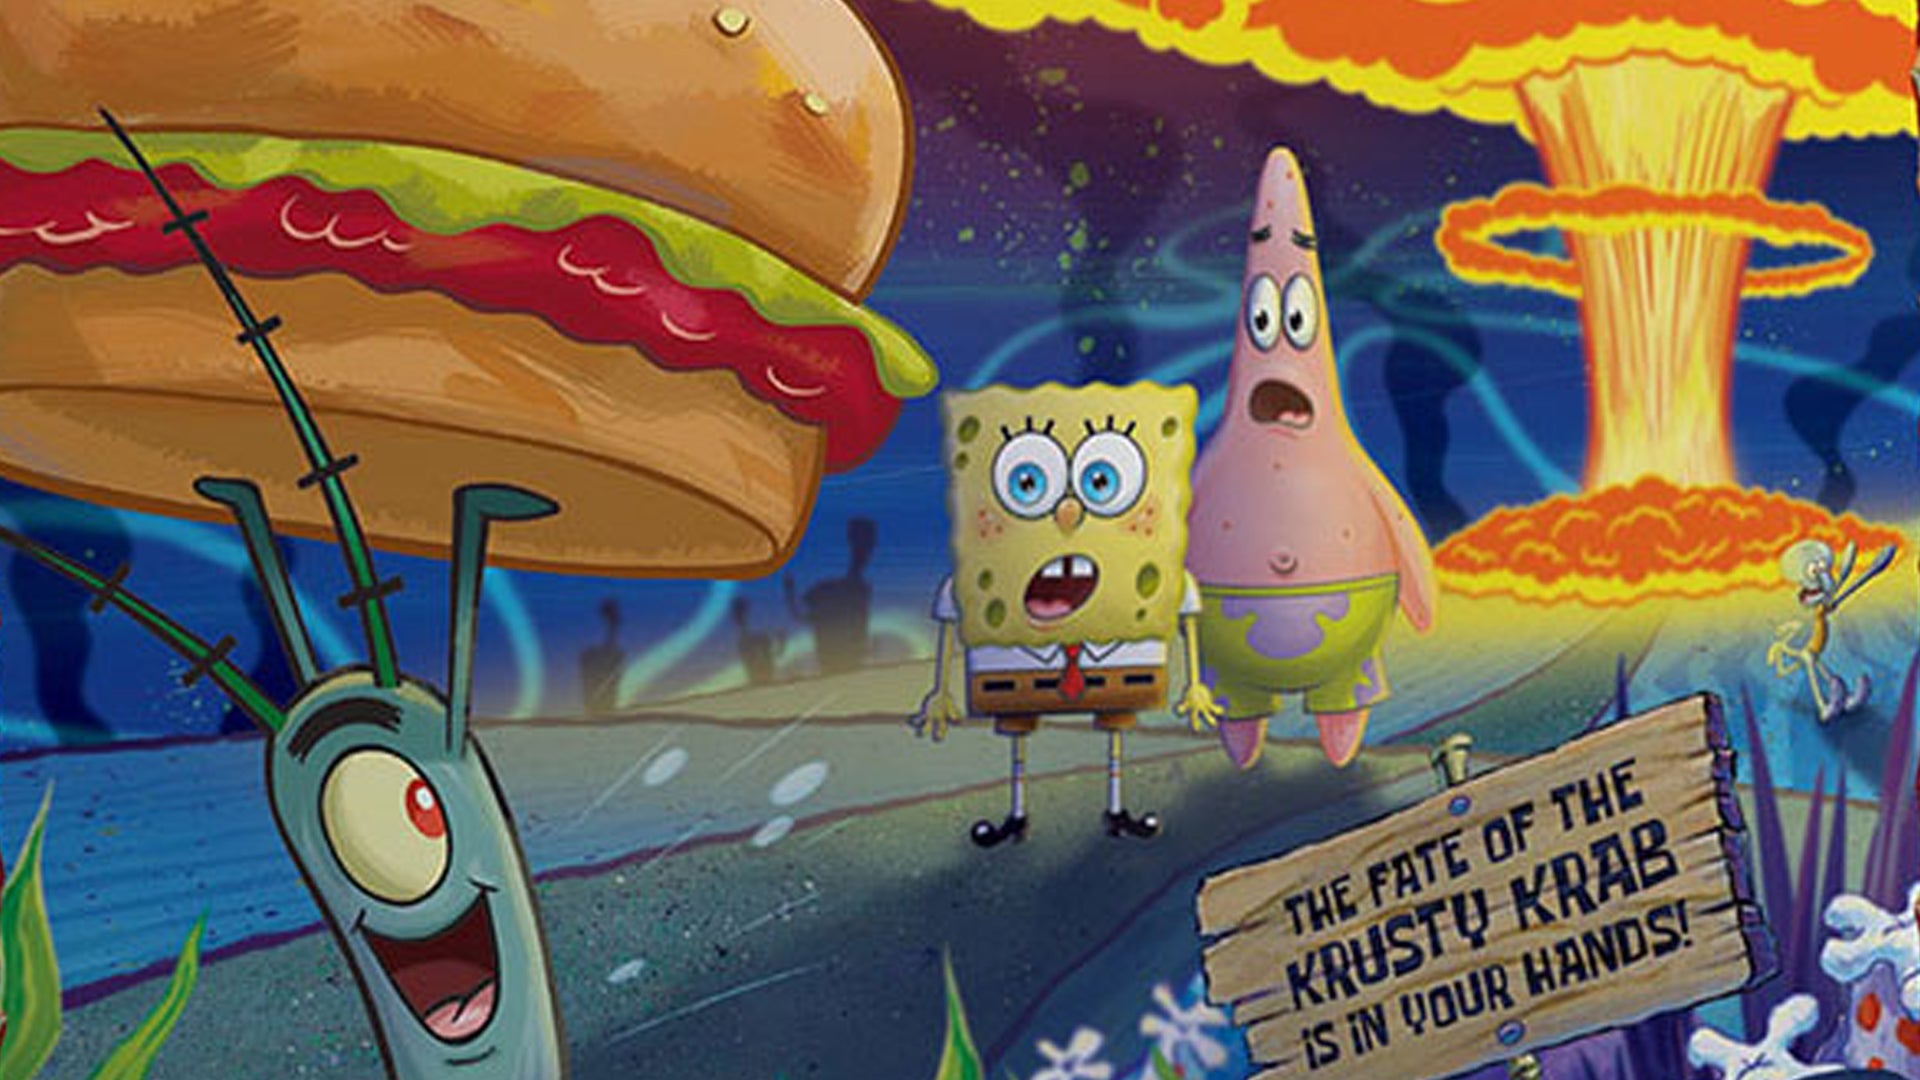 Image for Foil a Krabby Patty theft in SpongeBob Squarepants co-op board game Plankton Rising